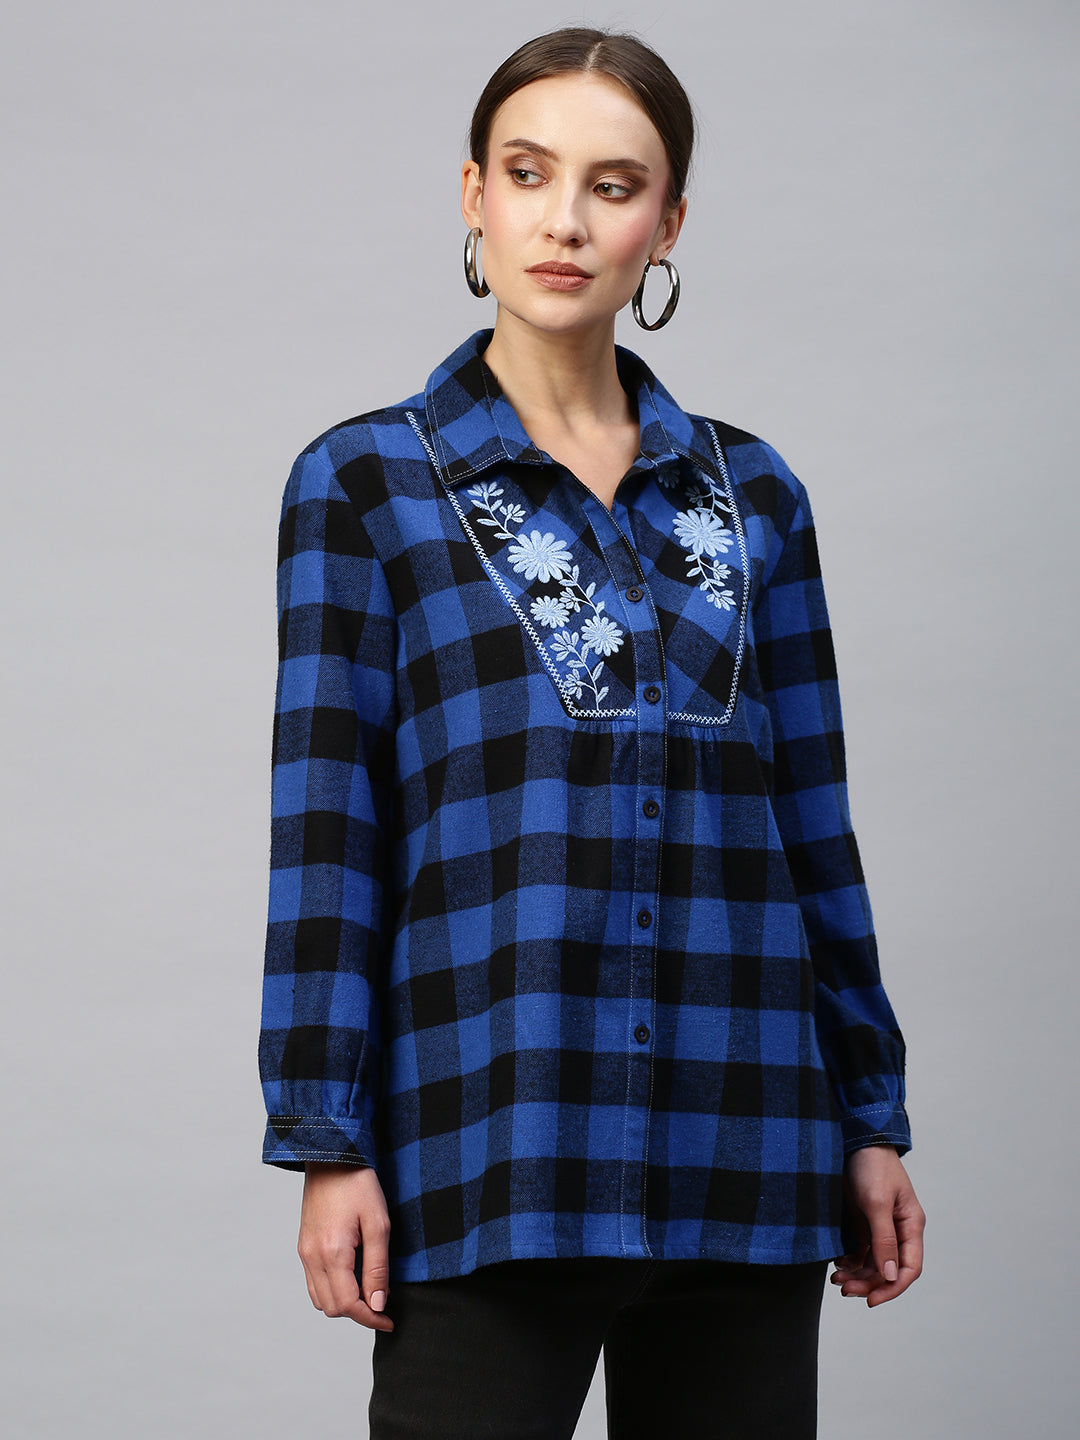 Embroidered Yoke Brushed Flannel Gingham Plaid Shirt